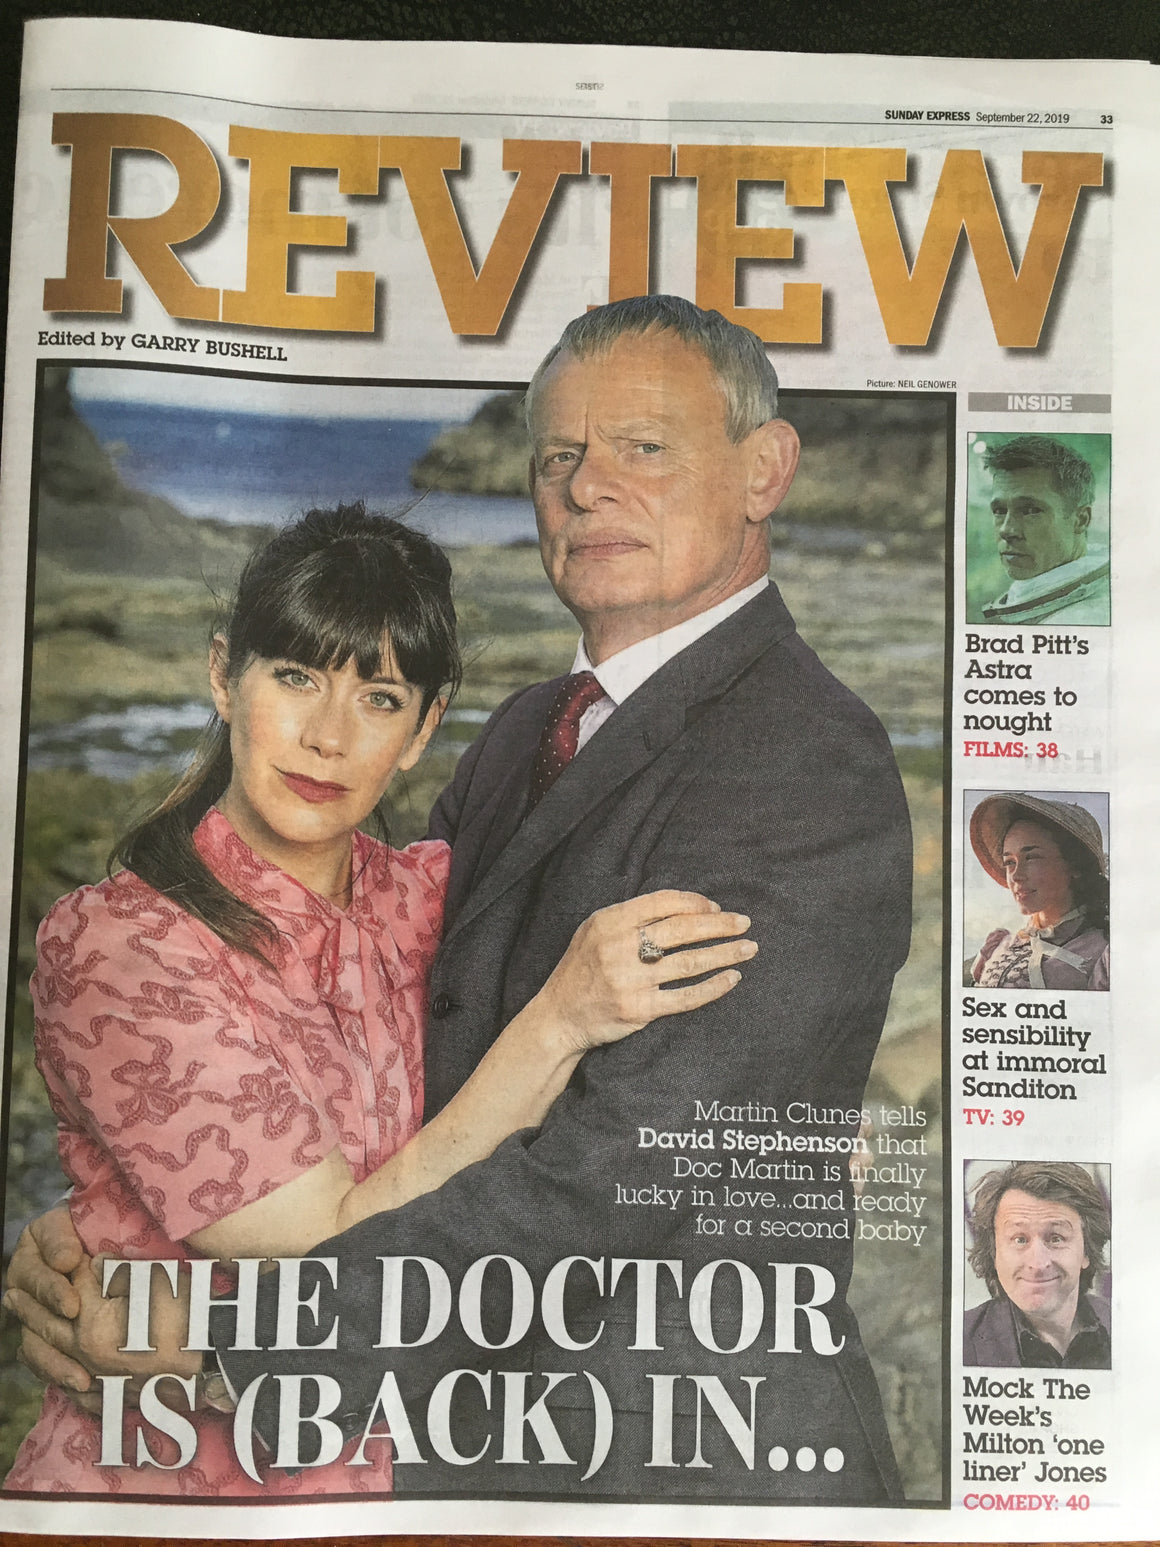 UK Express Review 22 September 2019: Martin Clunes Doc Martin Cover Interview